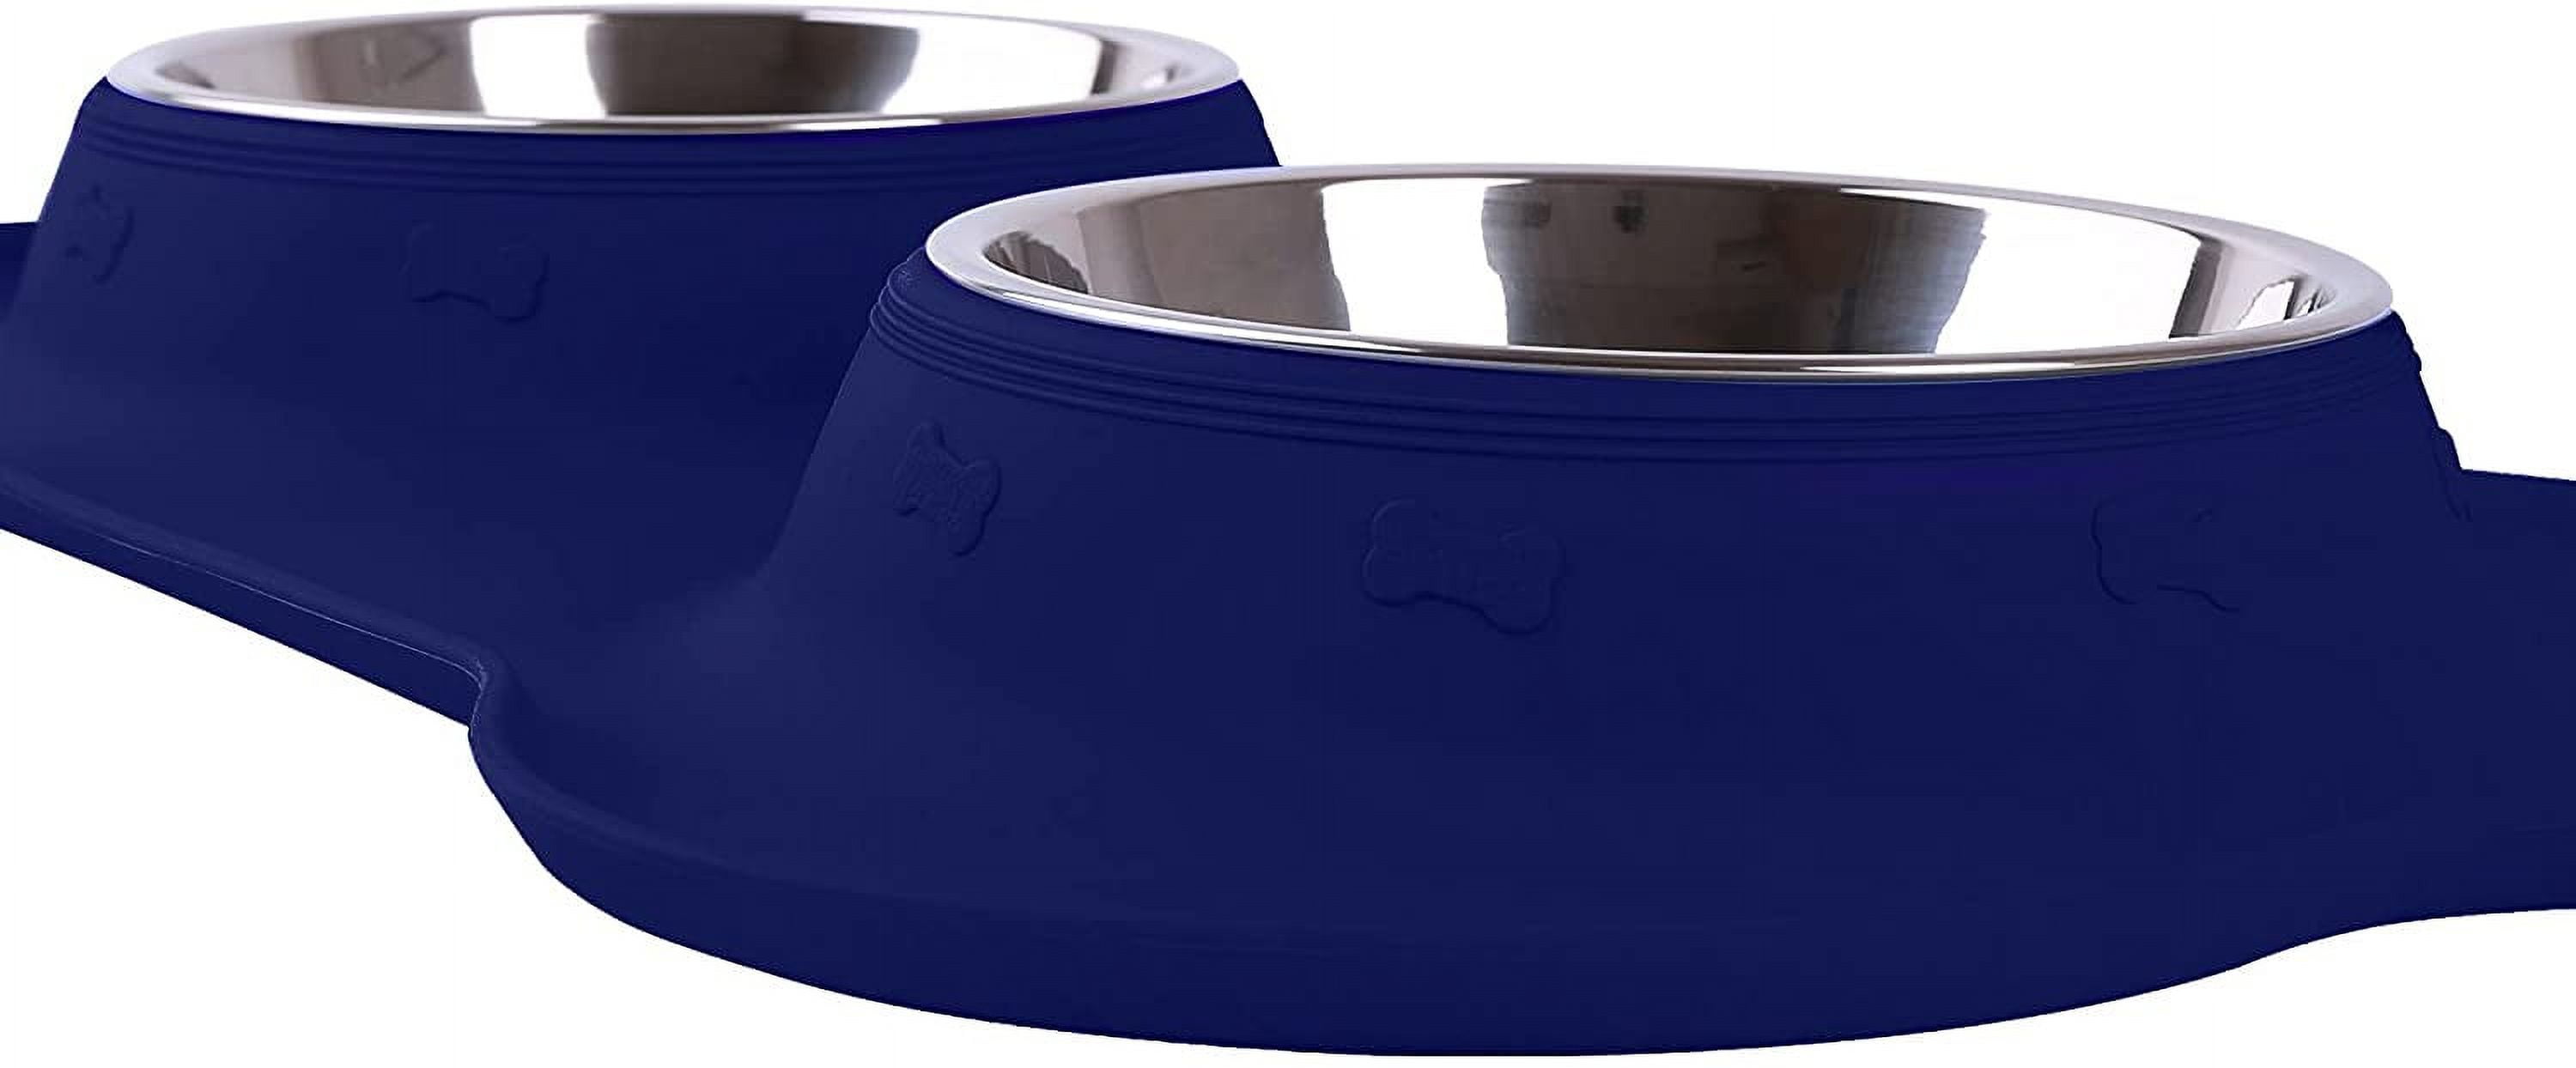 Fithome Dog Water Bowls & Dog Food Bowls Set, Mess Proof Pet Feeder with 2  Stainless Steel Bowls, No Spill Water Bowl for Dogs and Cats, Spill Proof